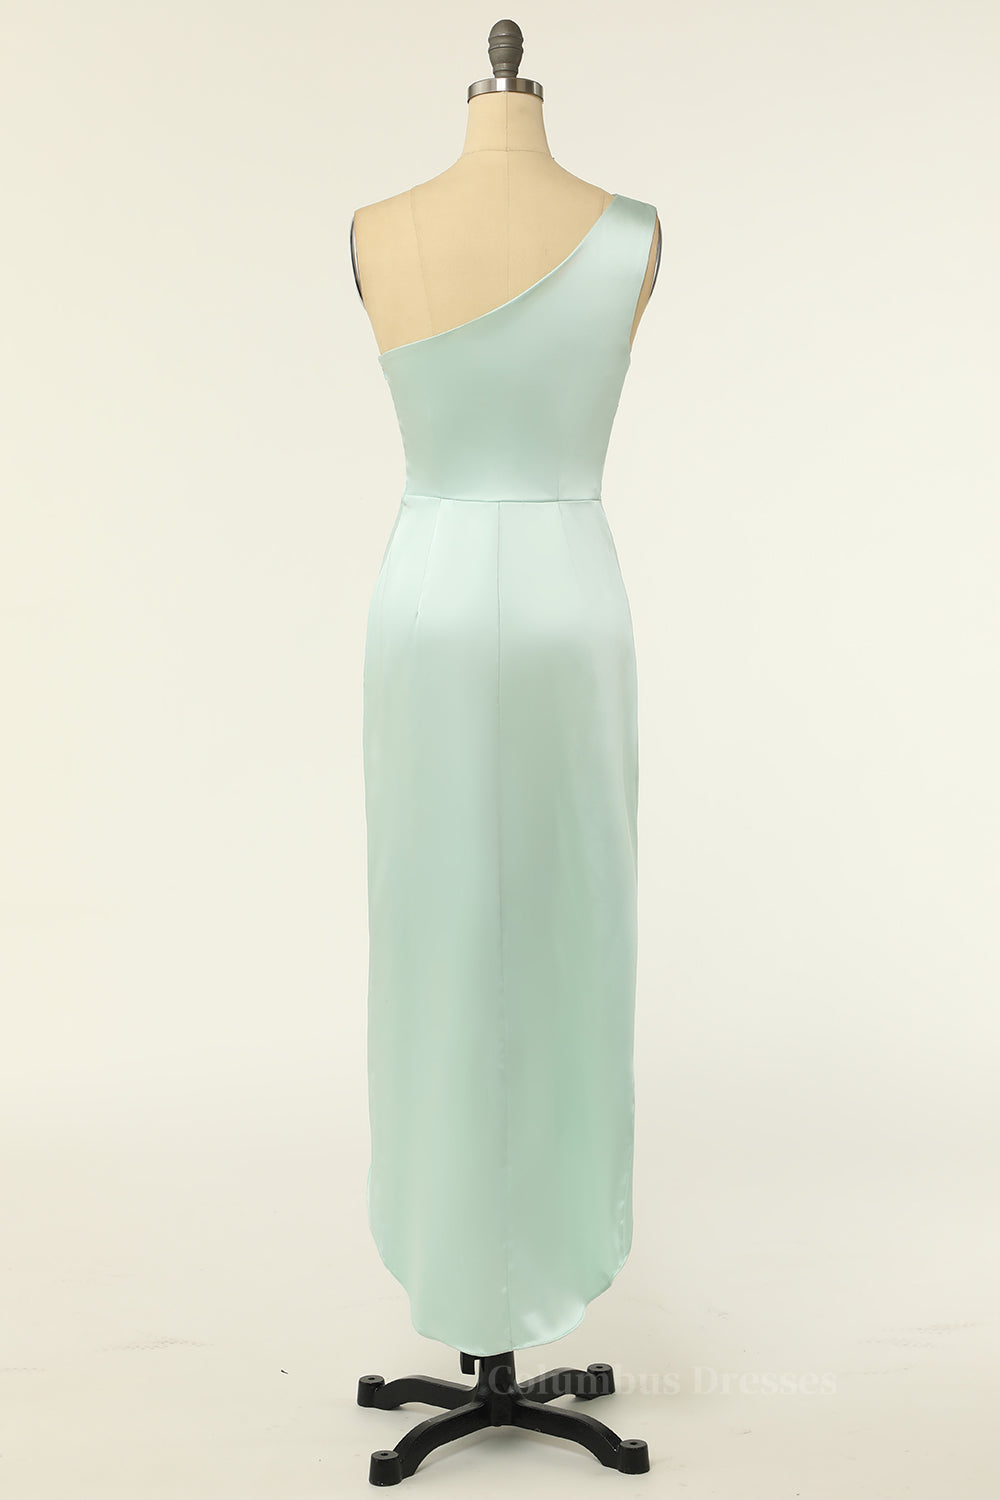 Prom Dresses For Chubby Girls, One Shoulder Mint Green Wrap Bridesmaid Dress